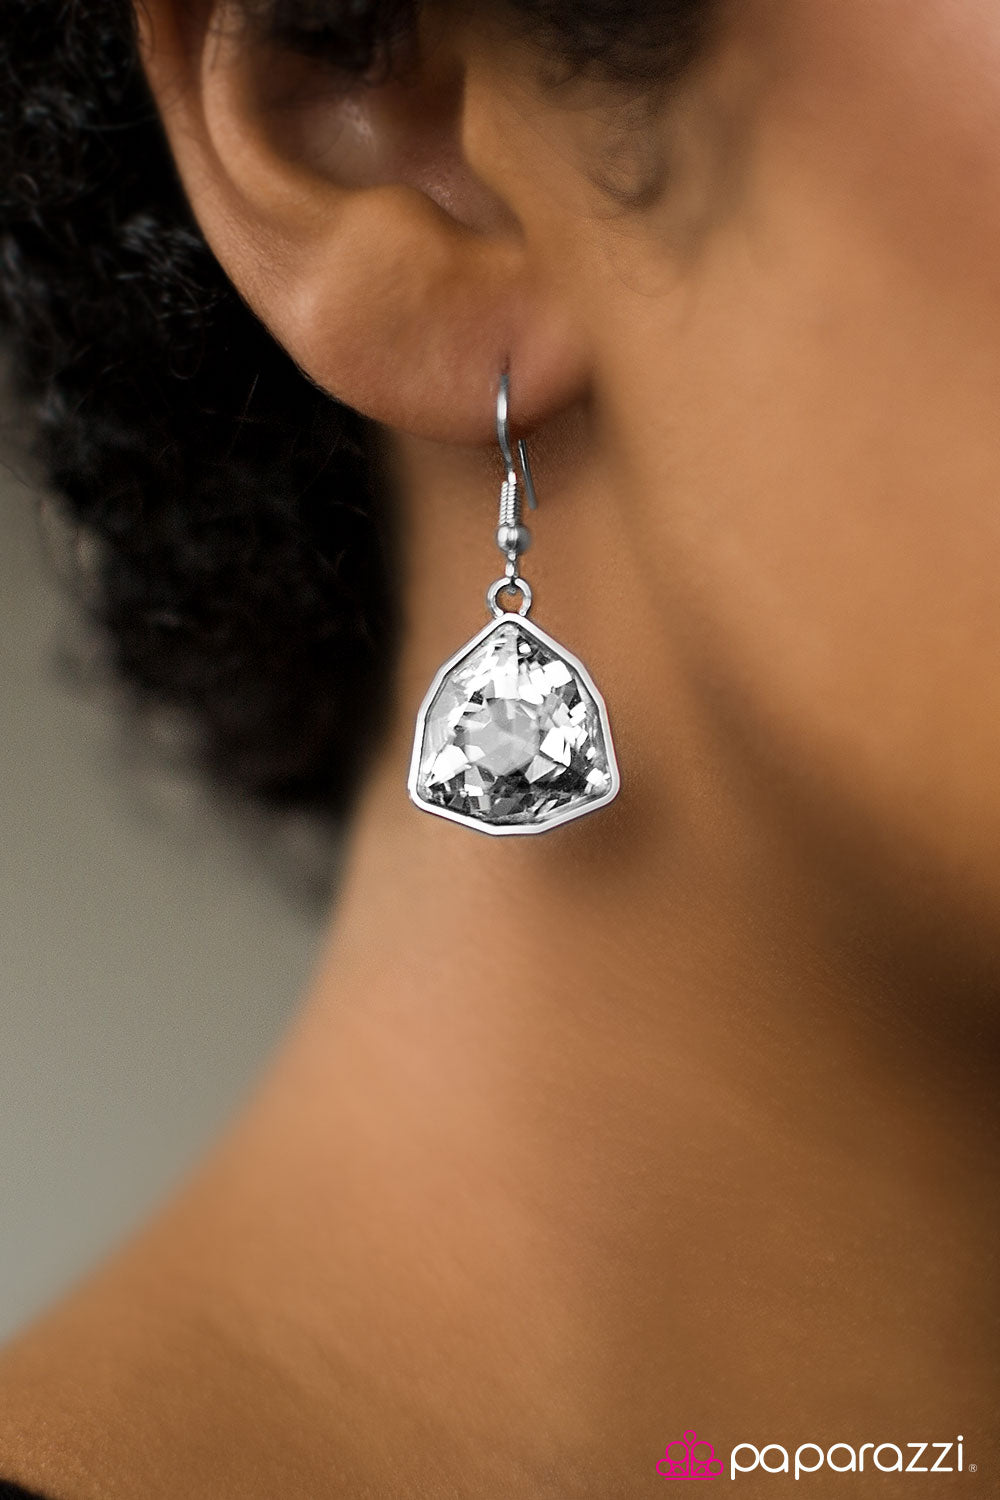 Turn That Frown Into A Crown - White - Paparazzi earrings